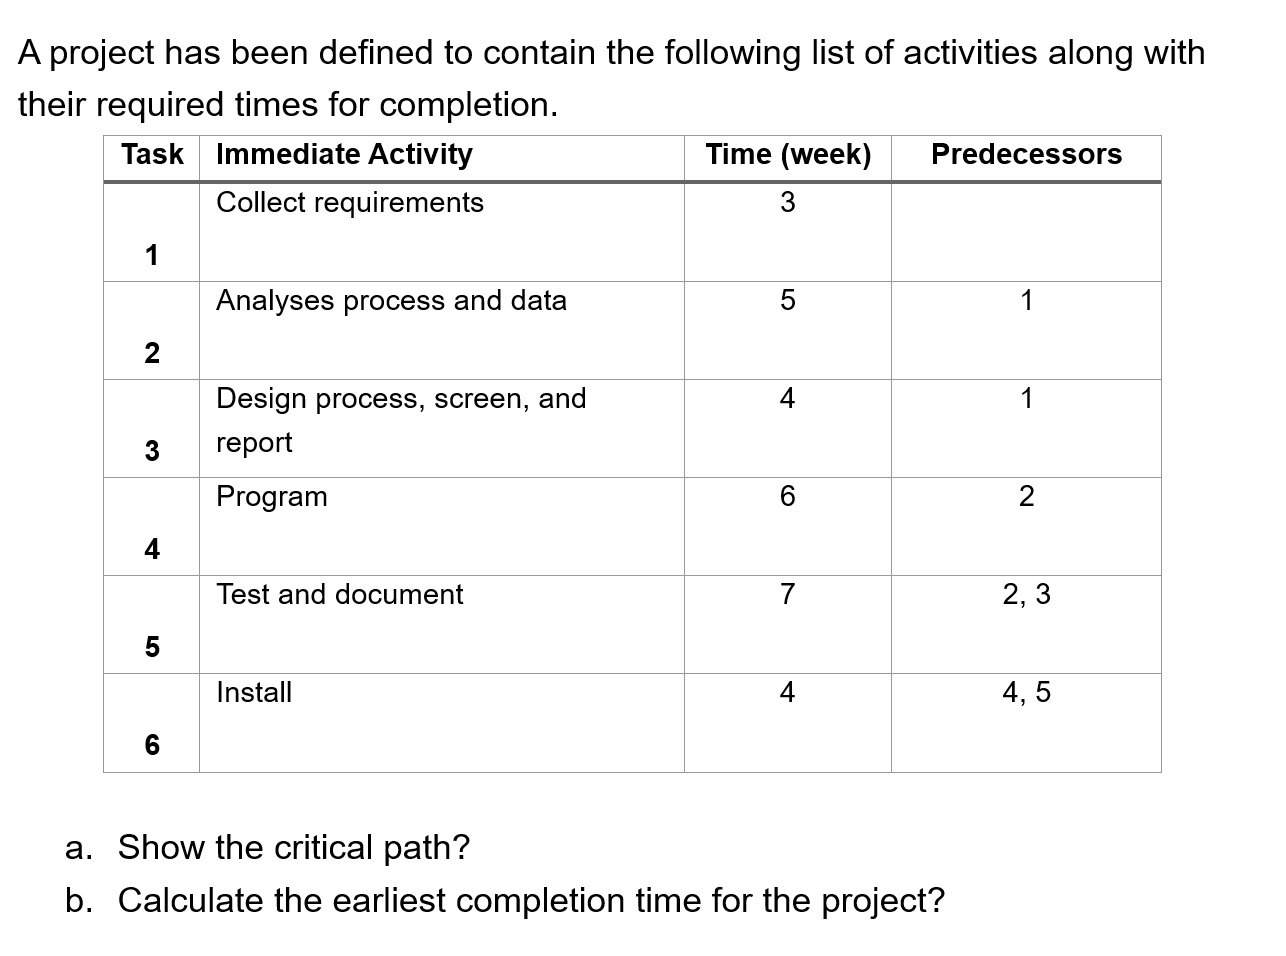 A project has been defined to contain the following list of activities along with their required times for